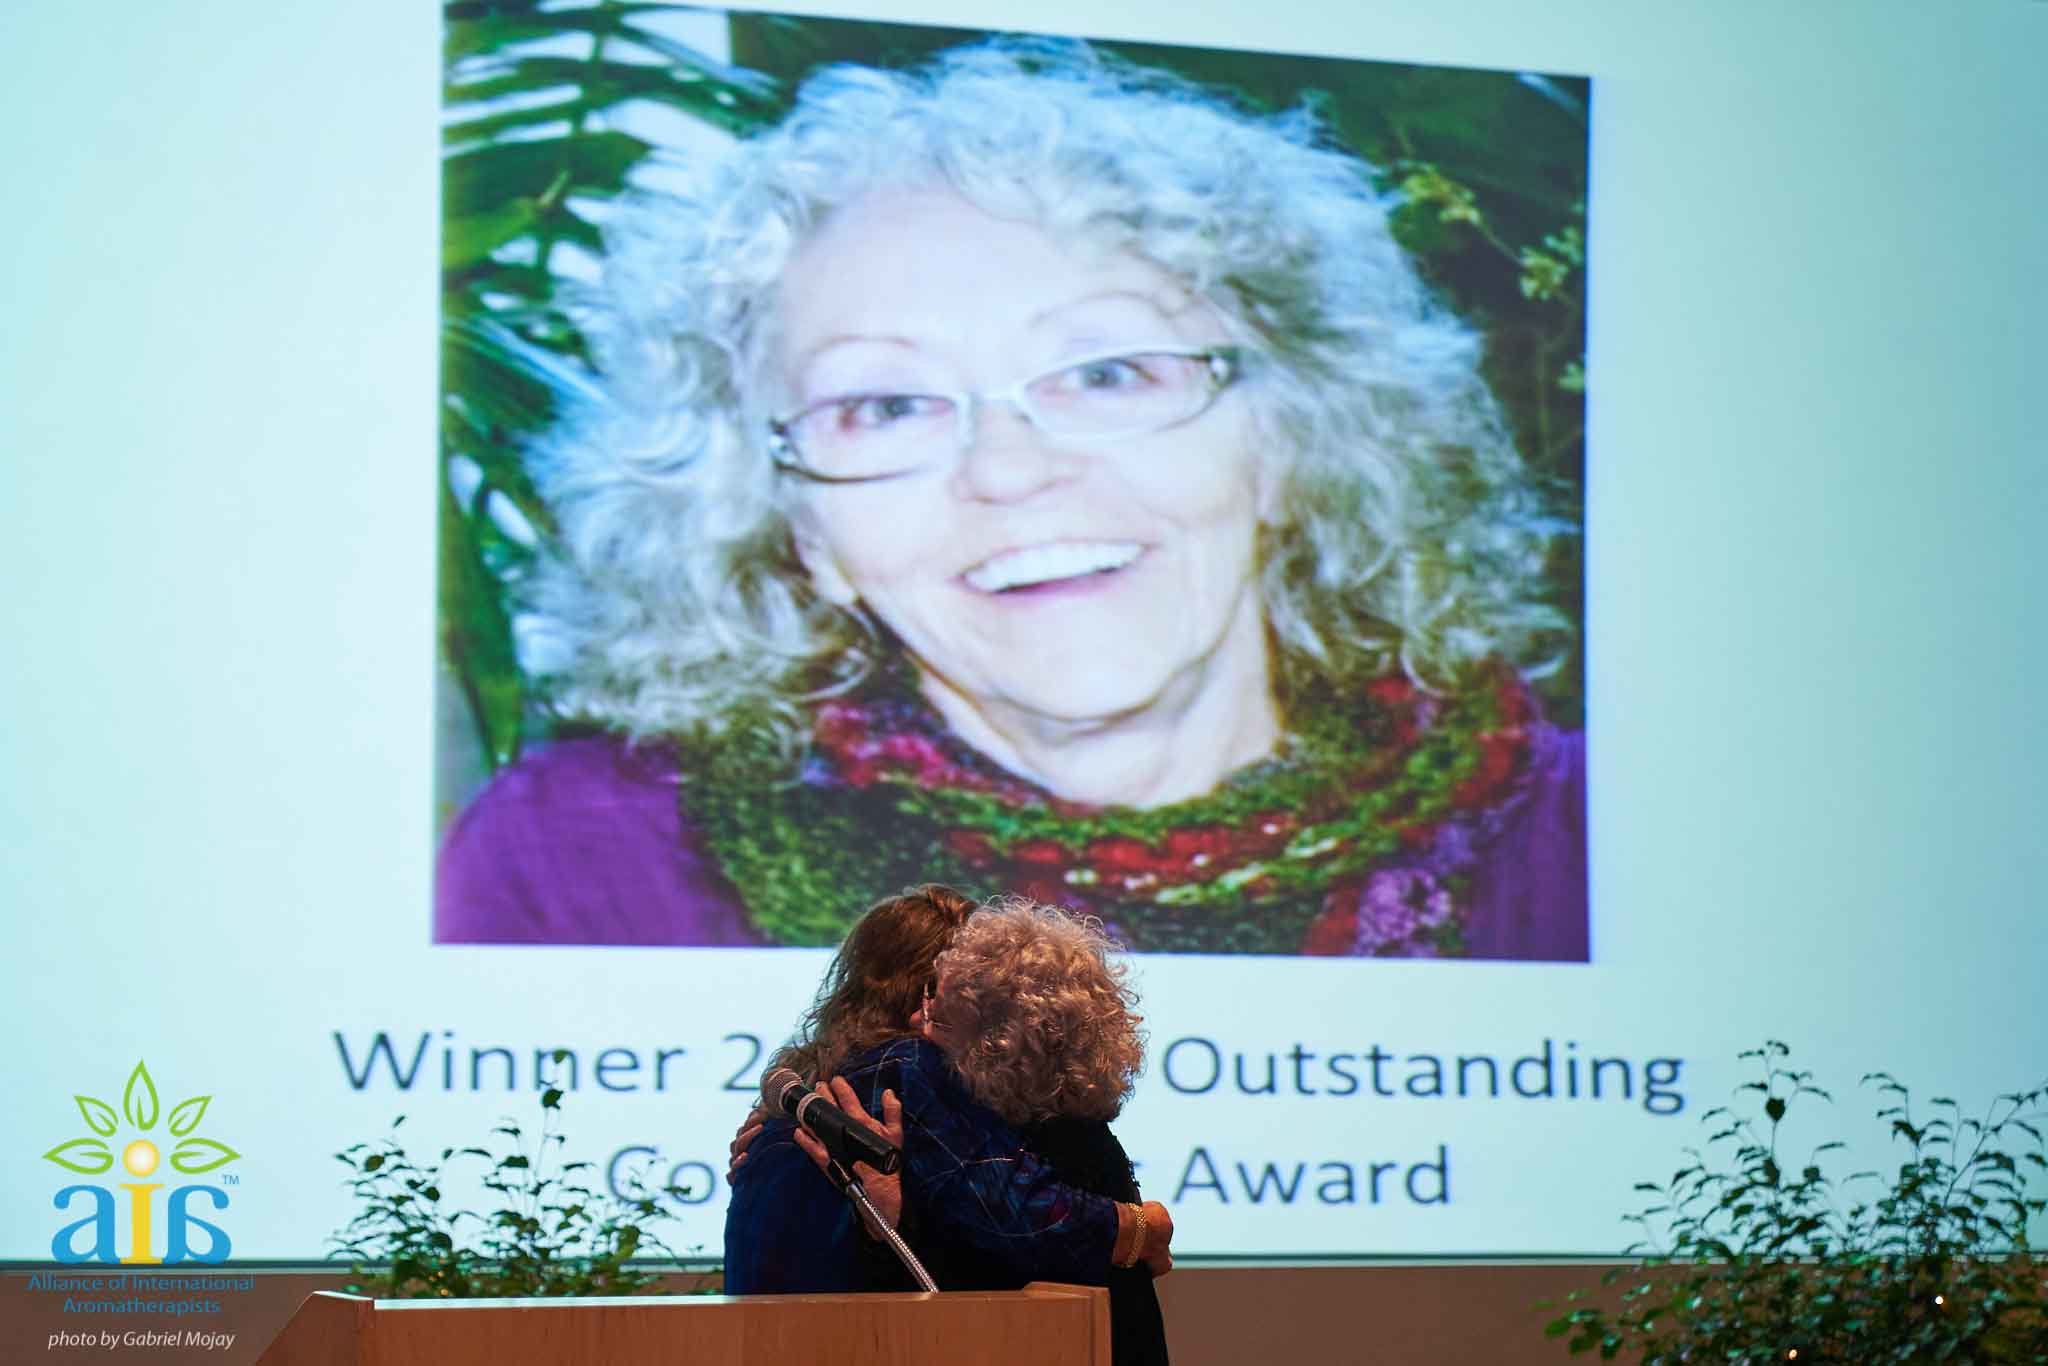 Sylla Recognized for Outstanding Contributions   At the Alliance of International Aromatherapists Conference this past August, many friends and colleagues had the pleasure of seeing Sylla win win this year's Outstanding Contributions Award. Thanks to our student's idea, we managed to get it on video. Check out our Facebook Live Video and see what it was like to be in the room during Sylla's second most happiest moment of her life. You'll also learn what her most happiest moment has been. Here is Sylla's response: I finally feel seen. I have worked 40 years in this field and accomplished a lot, and I feel like for the first time my story was told and I was honored for my efforts. When I started teaching long ago it was my dream to make a difference in the world of aromatherapy. As I went along and created Atlantic Institute of Aromatherapy, I had more ideas, wrote a book, hooked up with safety experts, went to Purdue and France chasing my dream and teaching others along the way.  After 9/11, I was moved to act, the UAE, Inc. formed organically and was supported by the community. Now the organization has been reinstated for the future generations! Getting the award and listening to the 11 mins of accomplishments was like a dream come true, I amazed myself(!) and felt completely recognized for the first time ever in my aroma career.  Watching the video later I realized there was this slideshow playing behind me, little did I know the care that Lora Cantele took to make the presentation. As the conference went on I learned how much some wanted me to win this, and how much they felt I deserved it long ago. I also learned that many did not even know all I have done in my 40 years. I feel completely seen and heard for the first time. With this honor, I feel that I leave a good legacy and hope to inspire others. I am so glad I was alive to say this! I have never felt so loved, honored and appreciated, in my life. I lovingly accept all the recognition and feel like my cup is overflowing again.   Thank you everyone who voted for Sylla. We hope to see you at the next Alliance of International Aromatherapists Conference in 2019!          